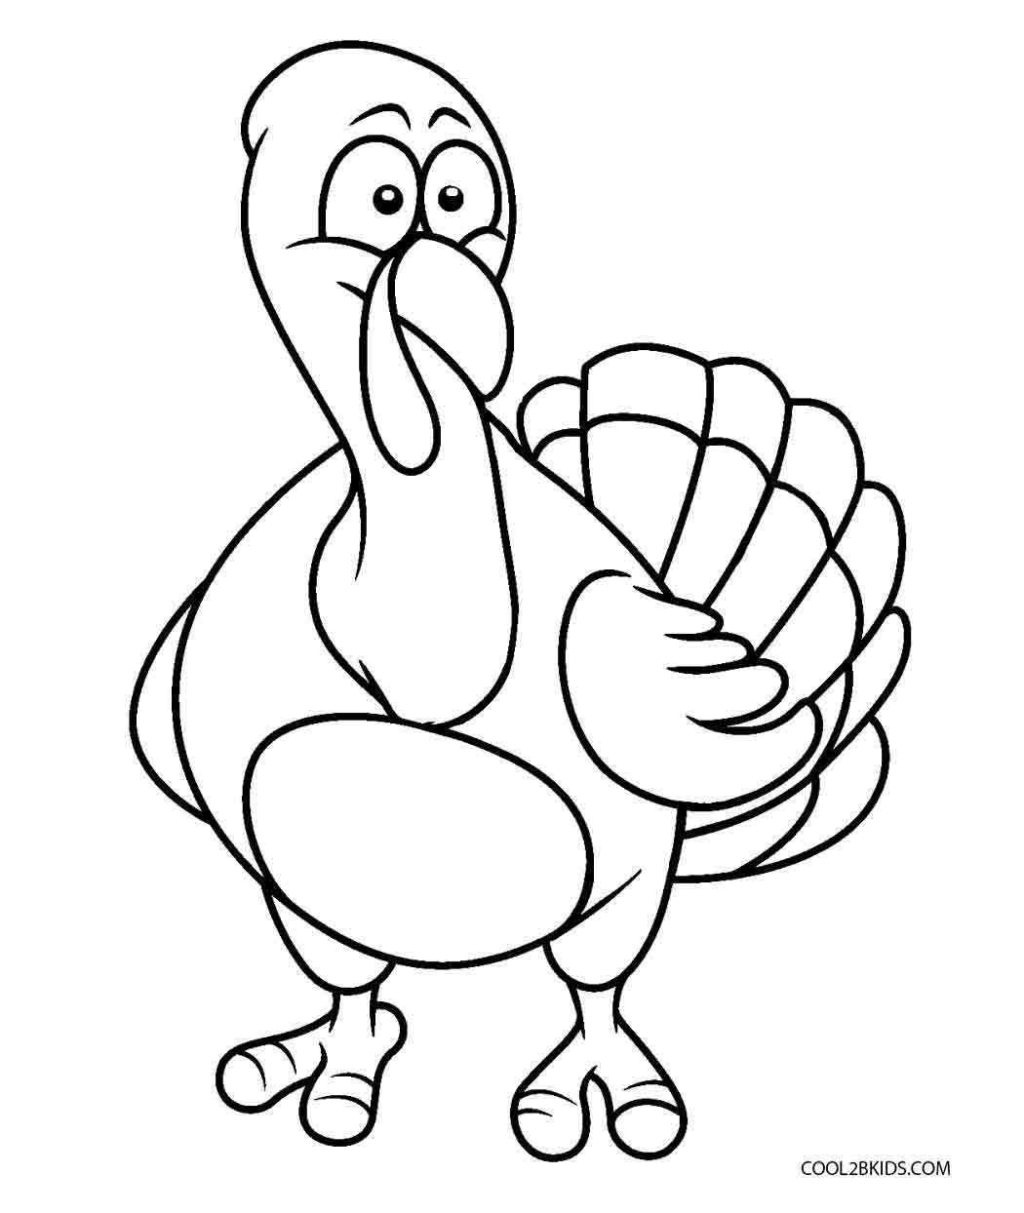 Coloring Book World ~ Coloring Book World Free Printable Turkey - Free Printable Turkey